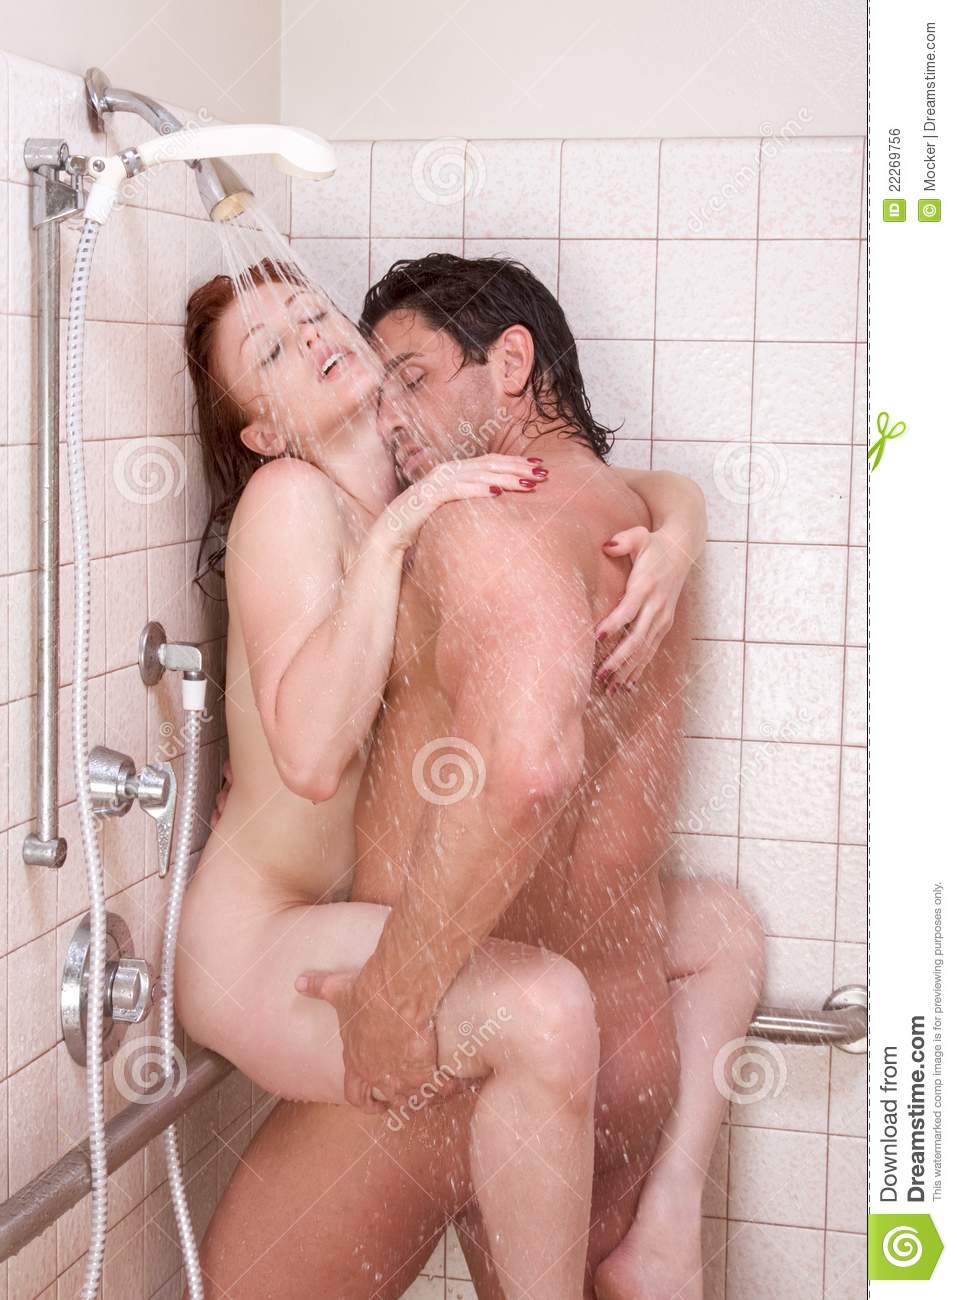 man and woman having sex in shower pics